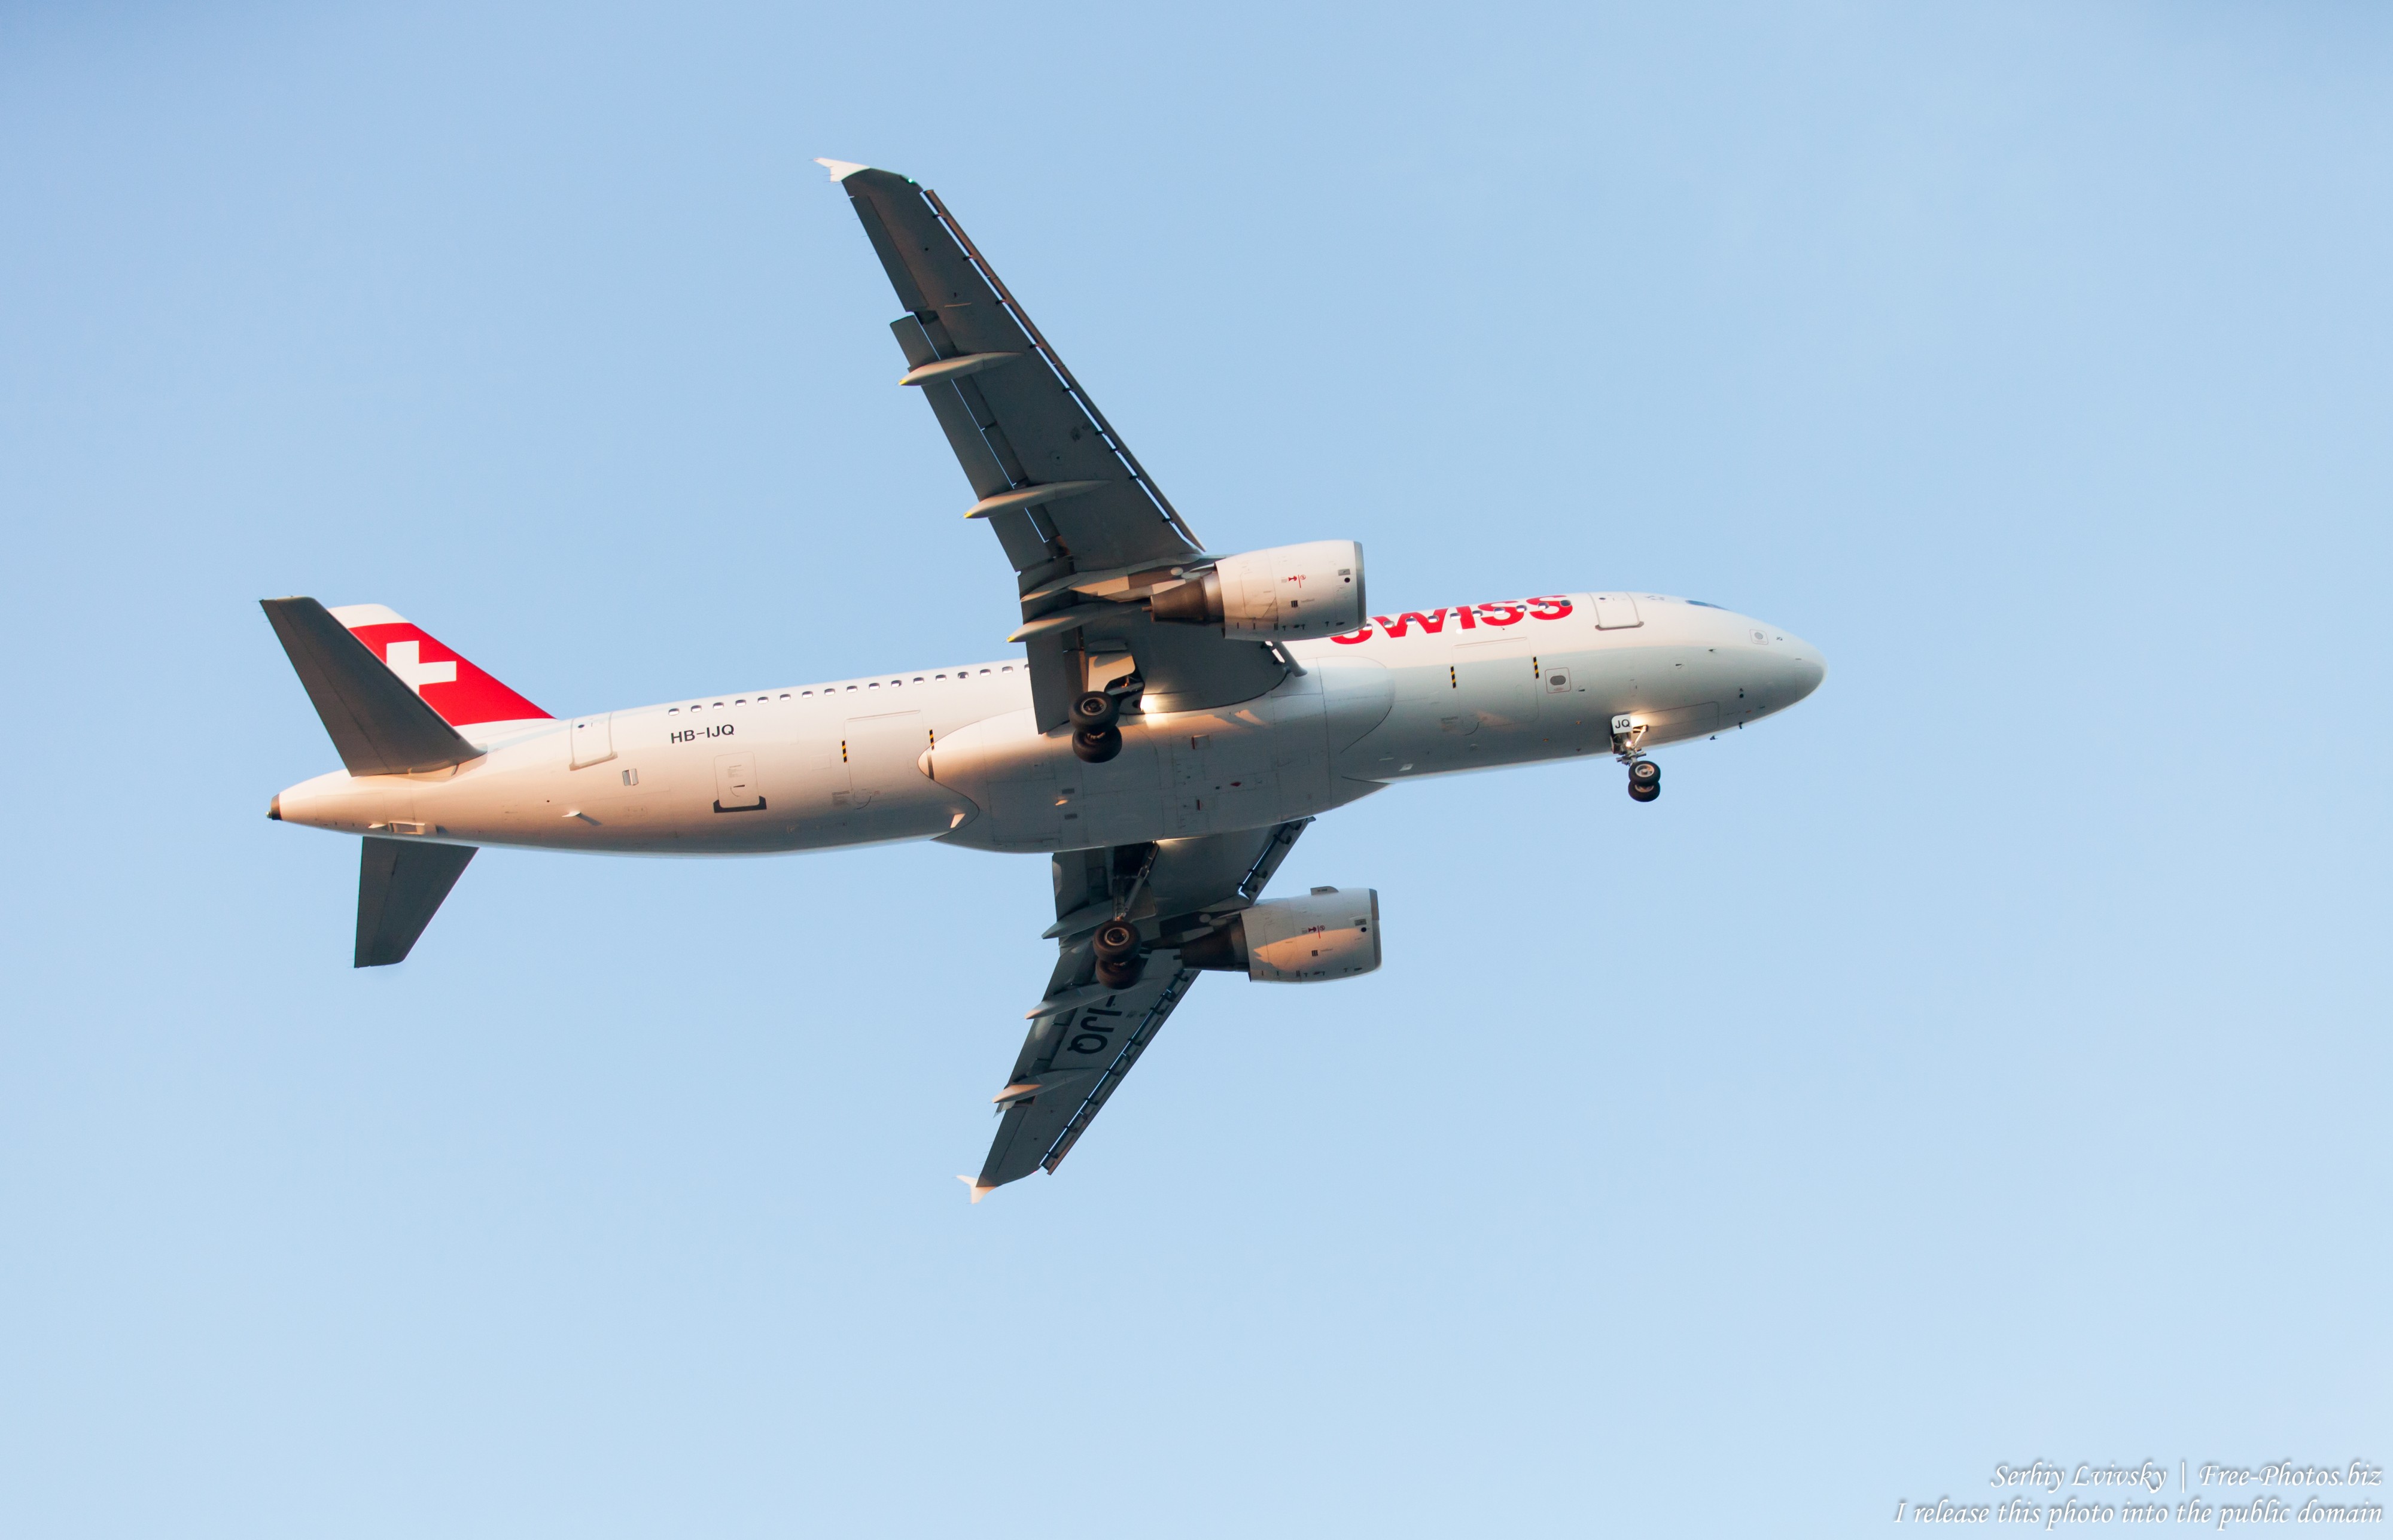 a Swiss Air Lines airplane near Zurich airport in December 2015 photographed by Serhiy Lvivsky, picture 2